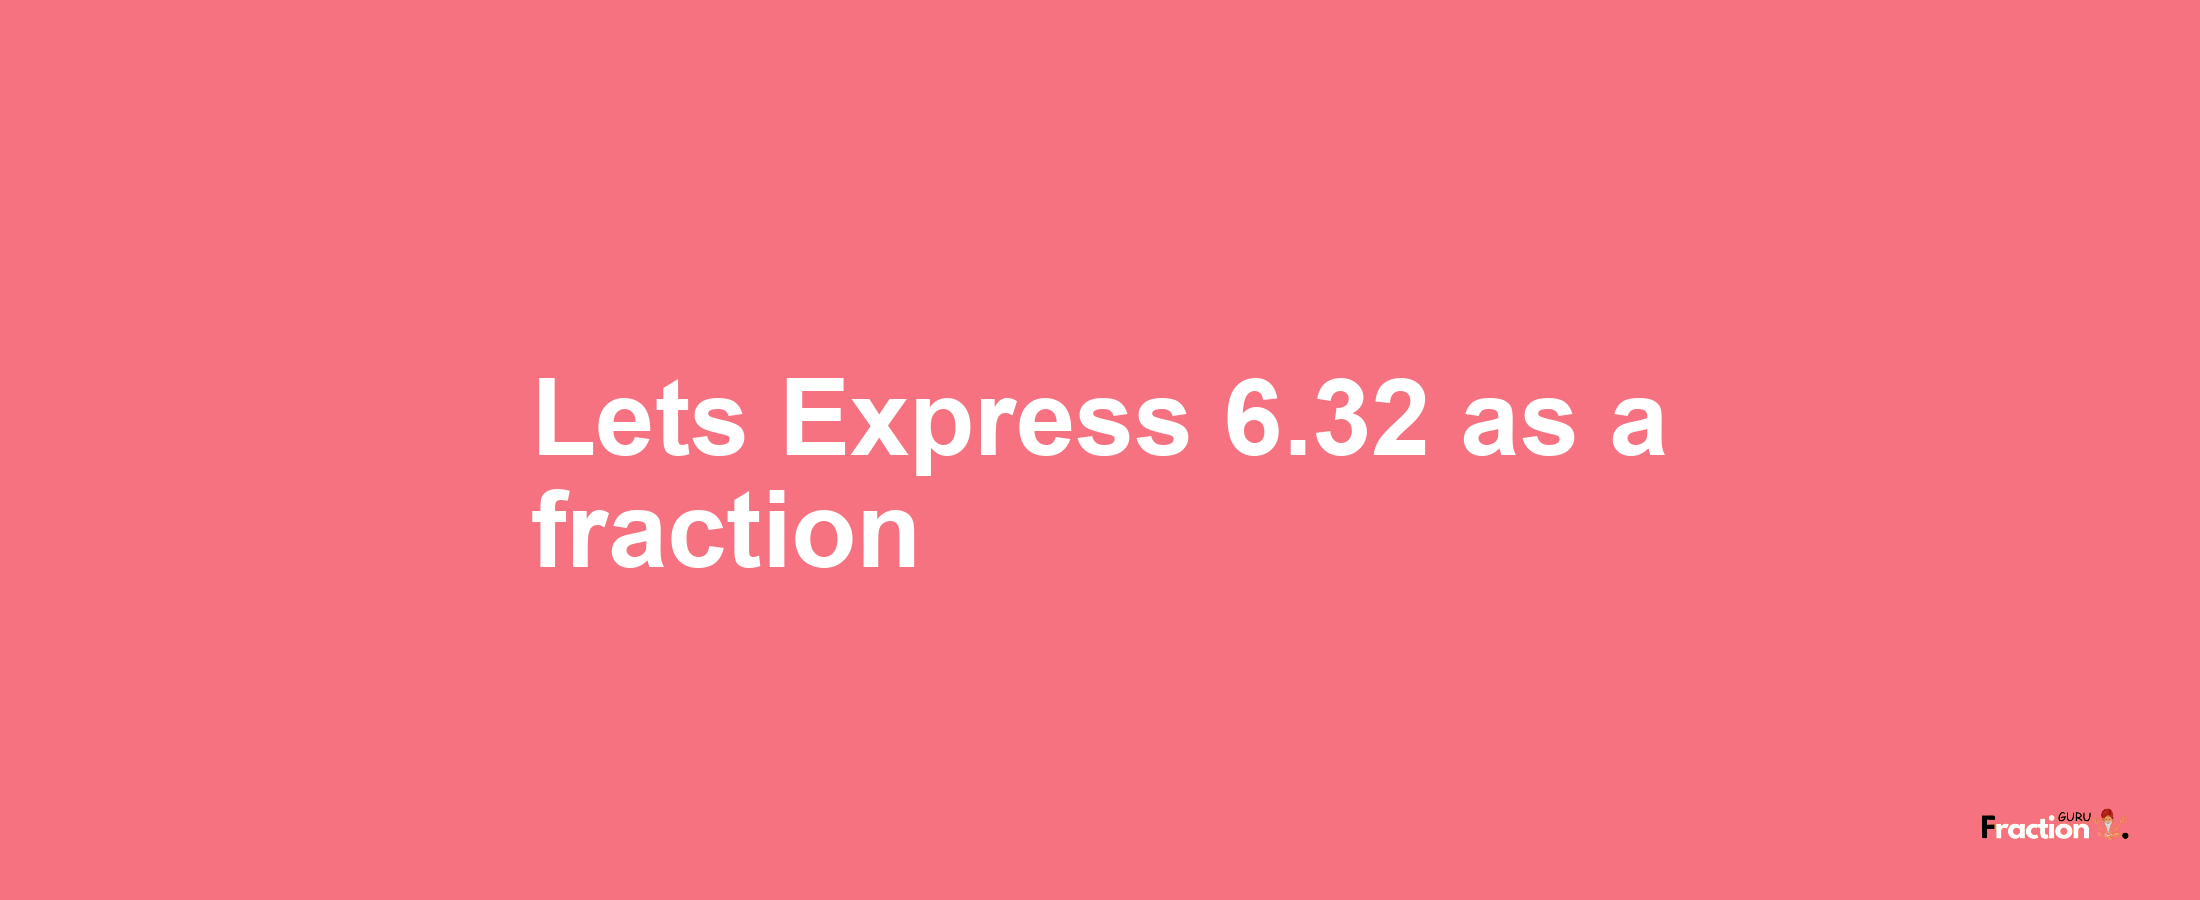 Lets Express 6.32 as afraction